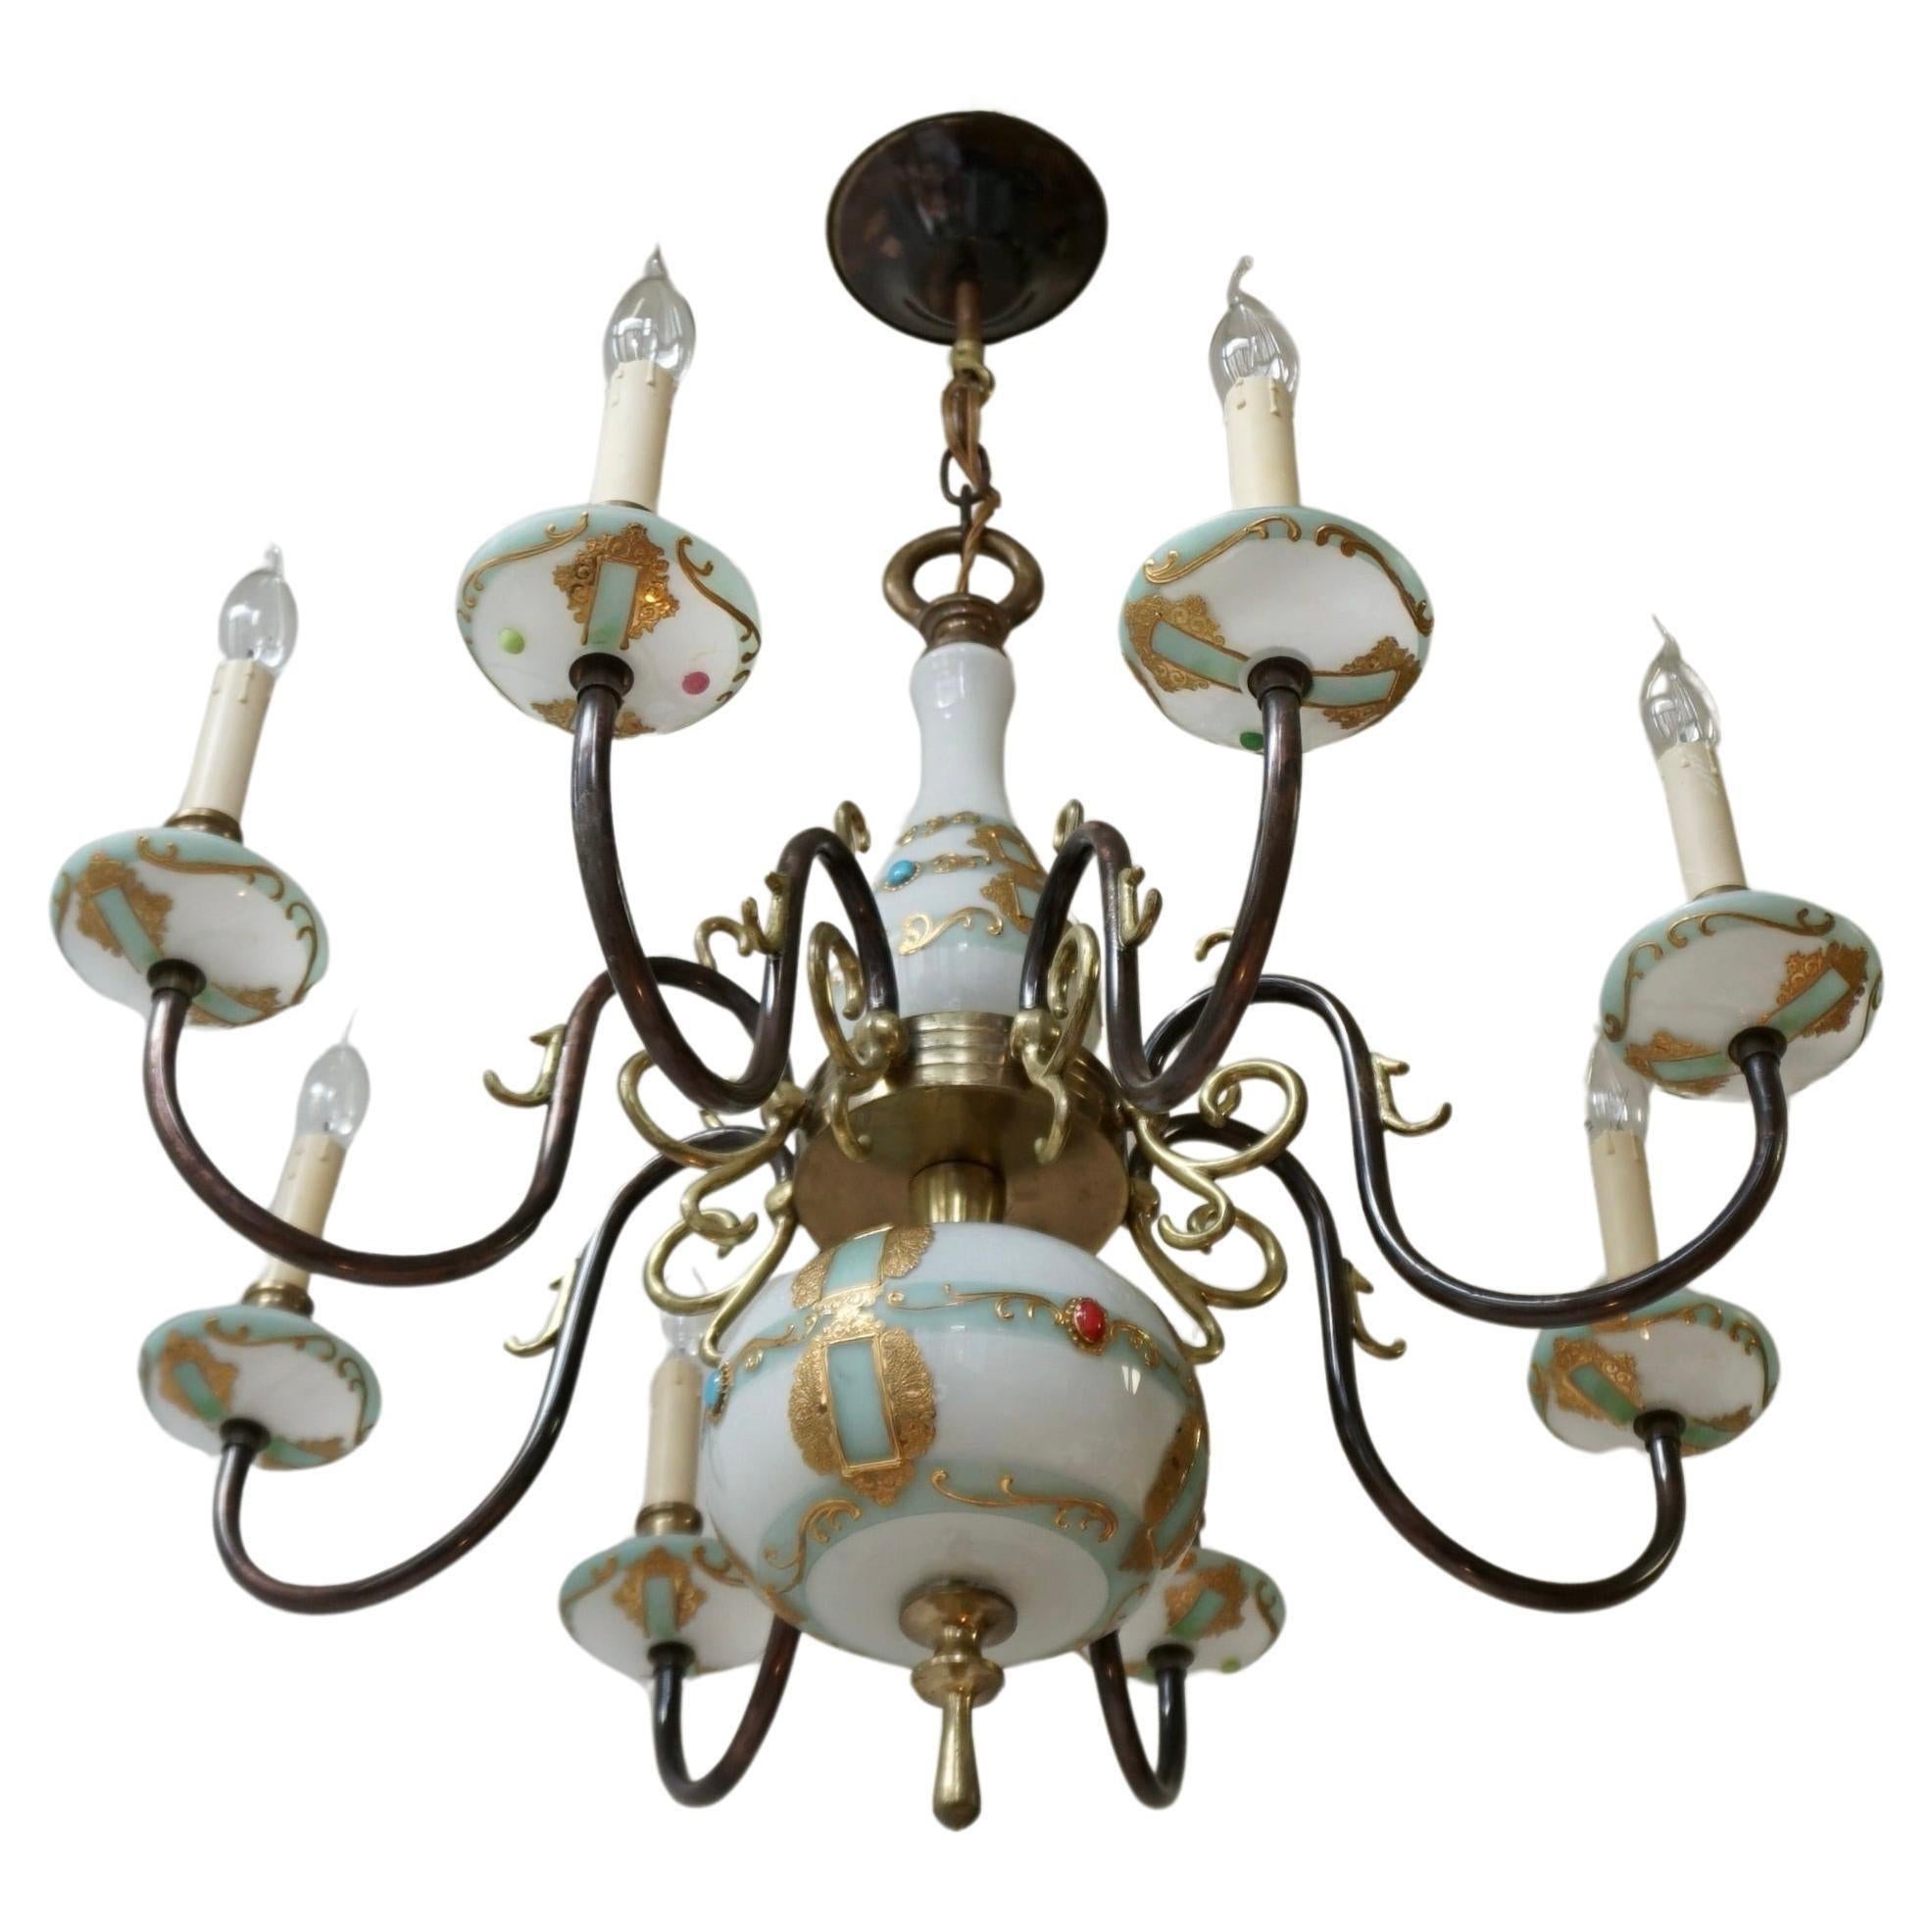 French glass and bronze chandelier 8 arm lights Hollywood Regency.

The light is in good vintage condition and full working order with a lovely patina of age. It requires 8 x E14 screw base bulbs or LEDs. This fixture can be worked in any country of